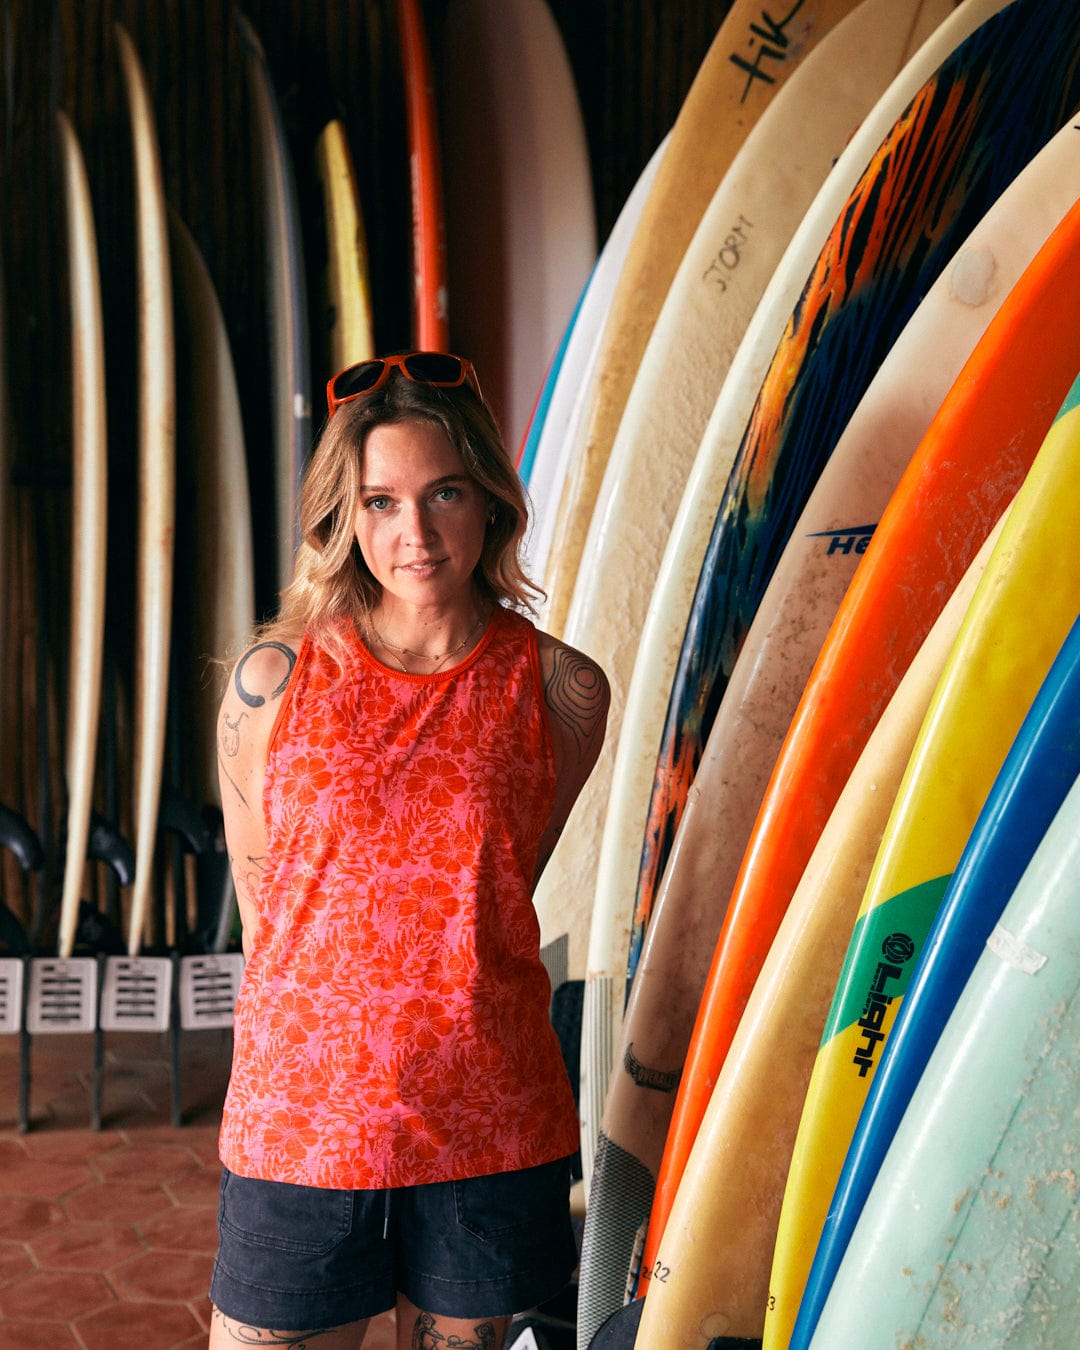 A person wearing a Saltrock Hibiscus - Womens Vest - Red and black shorts stands in front of an array of surfboards.